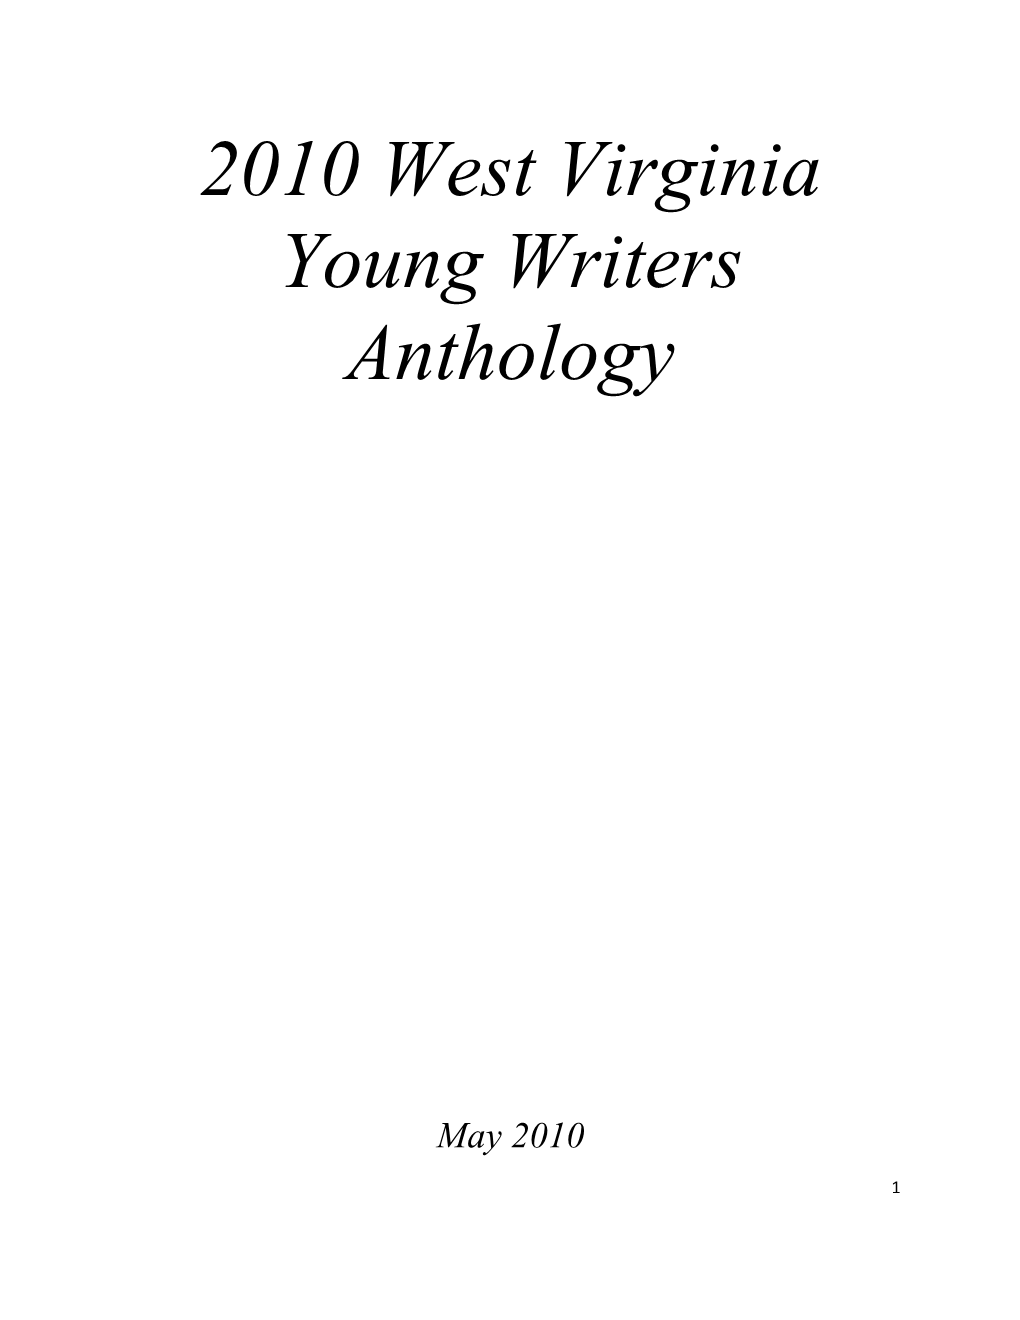 2010 West Virginia Young Writers Anthology